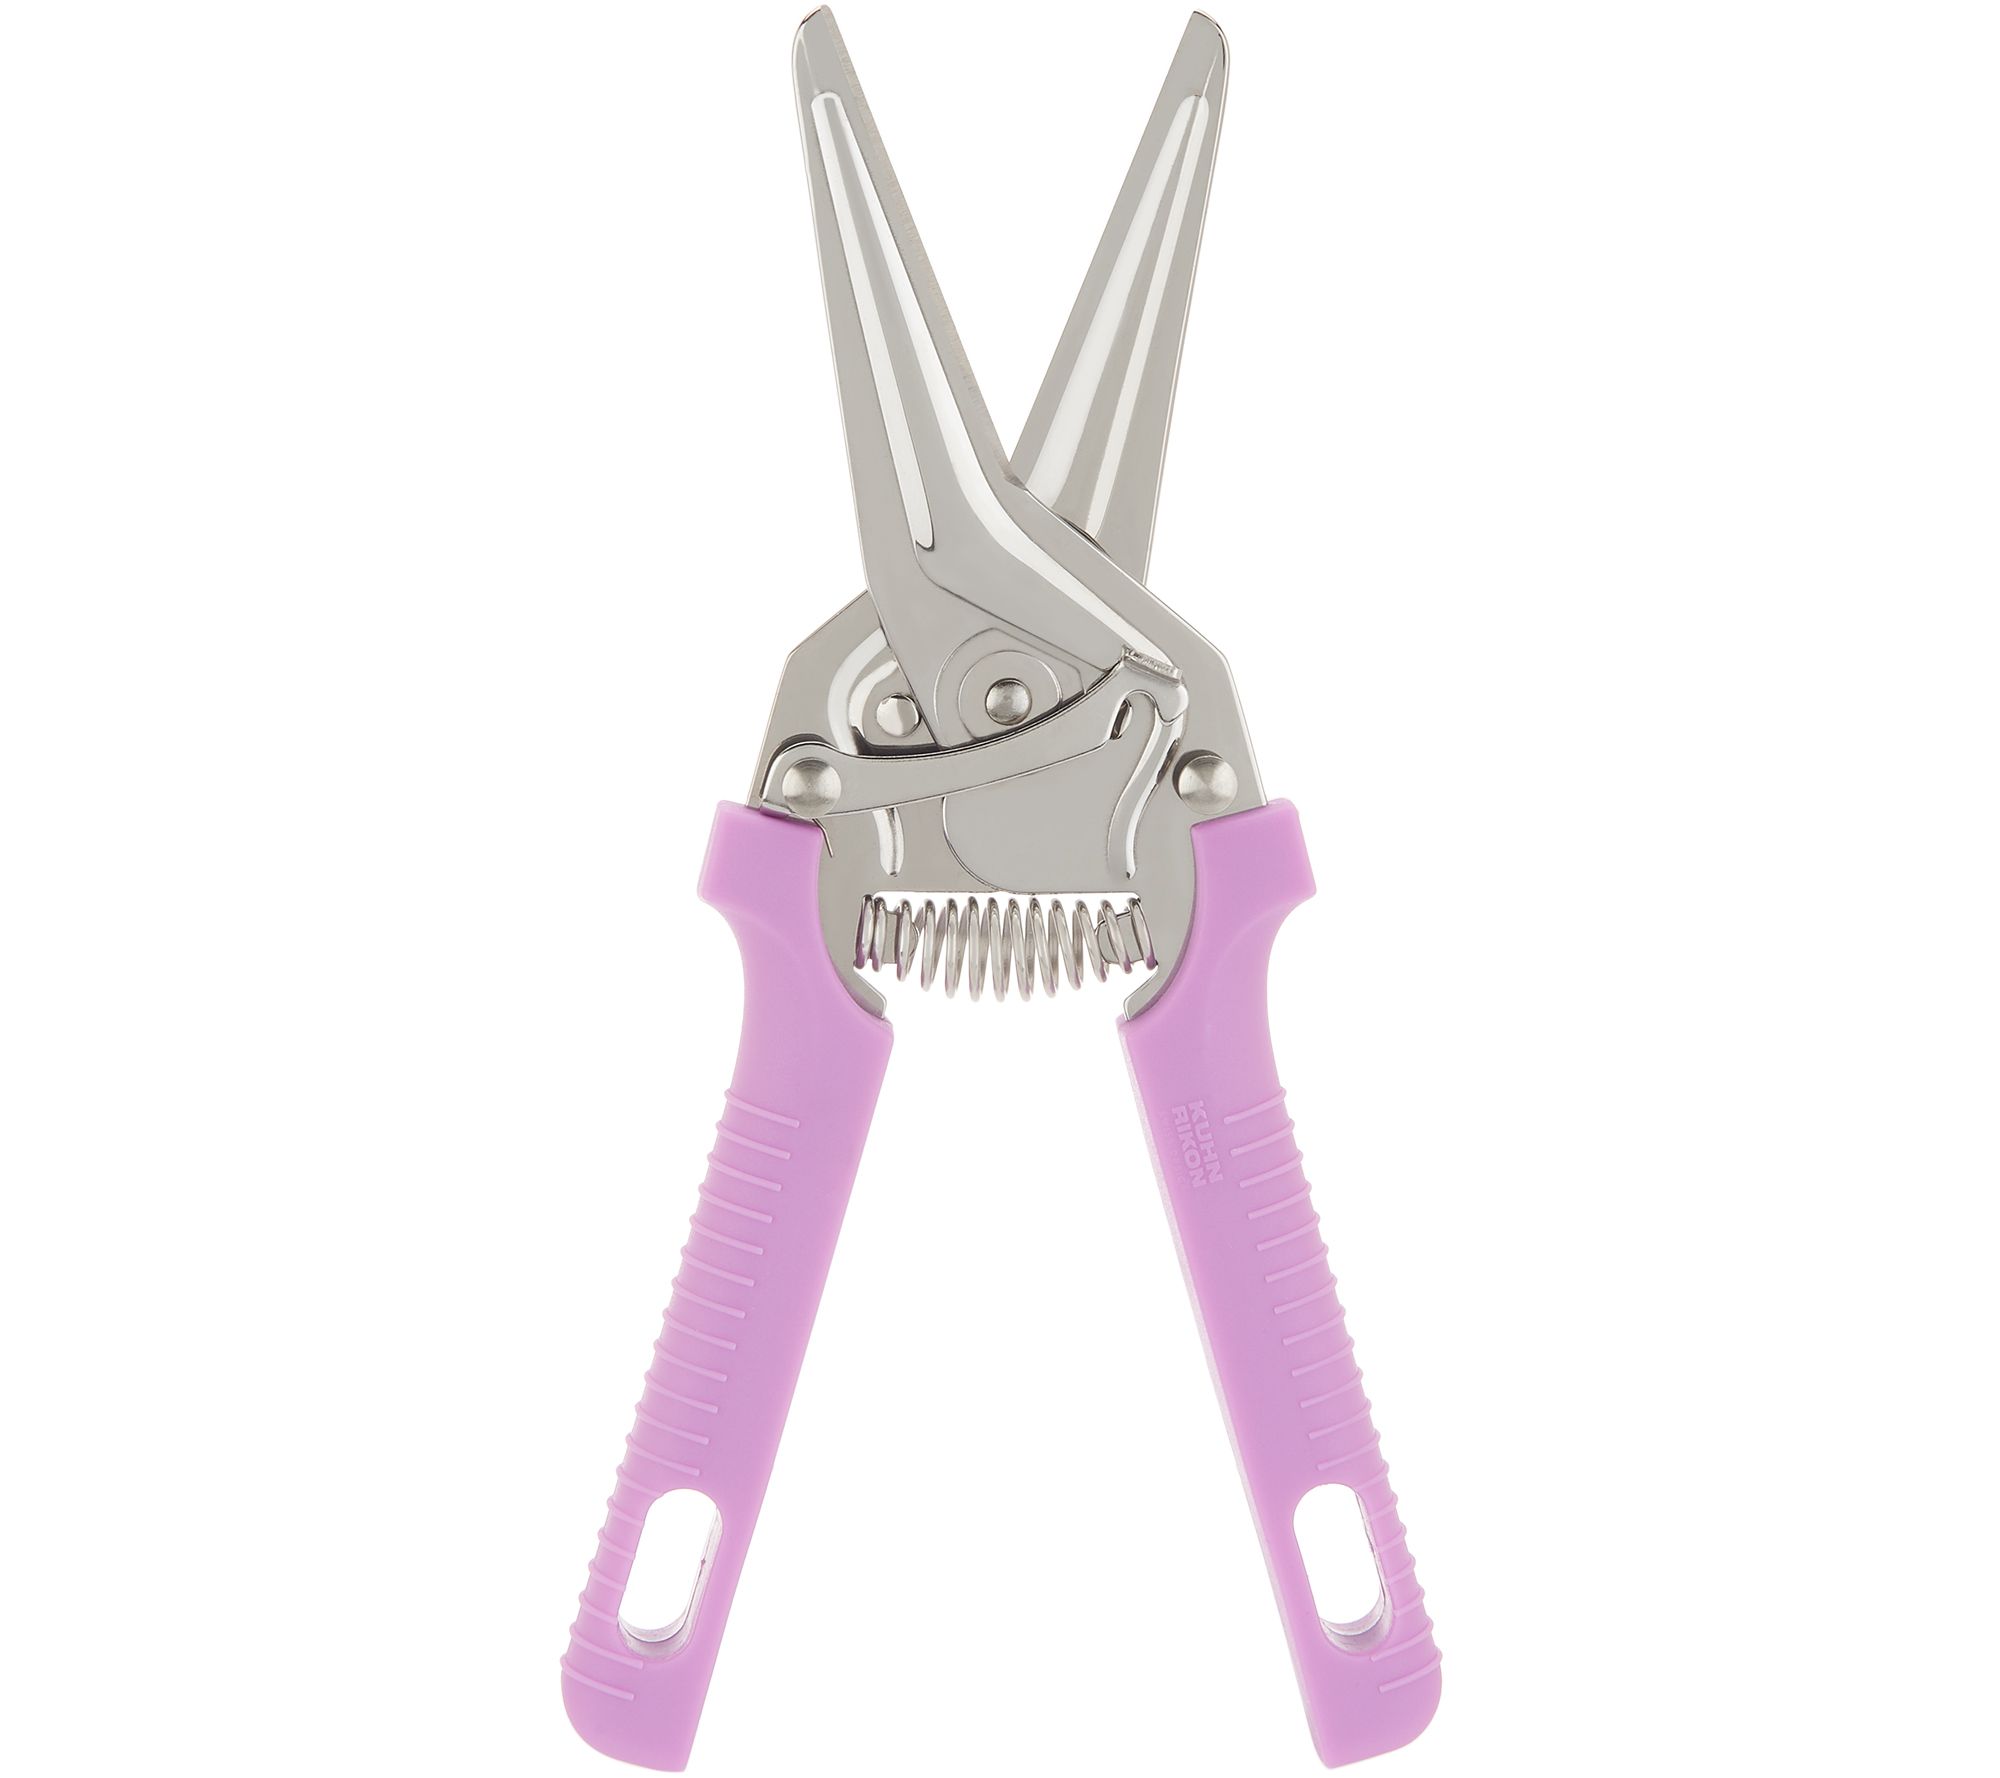 How Good are the Kuhn Rikon Shears Sold by QVC/Kuhn Rikon Product Review 